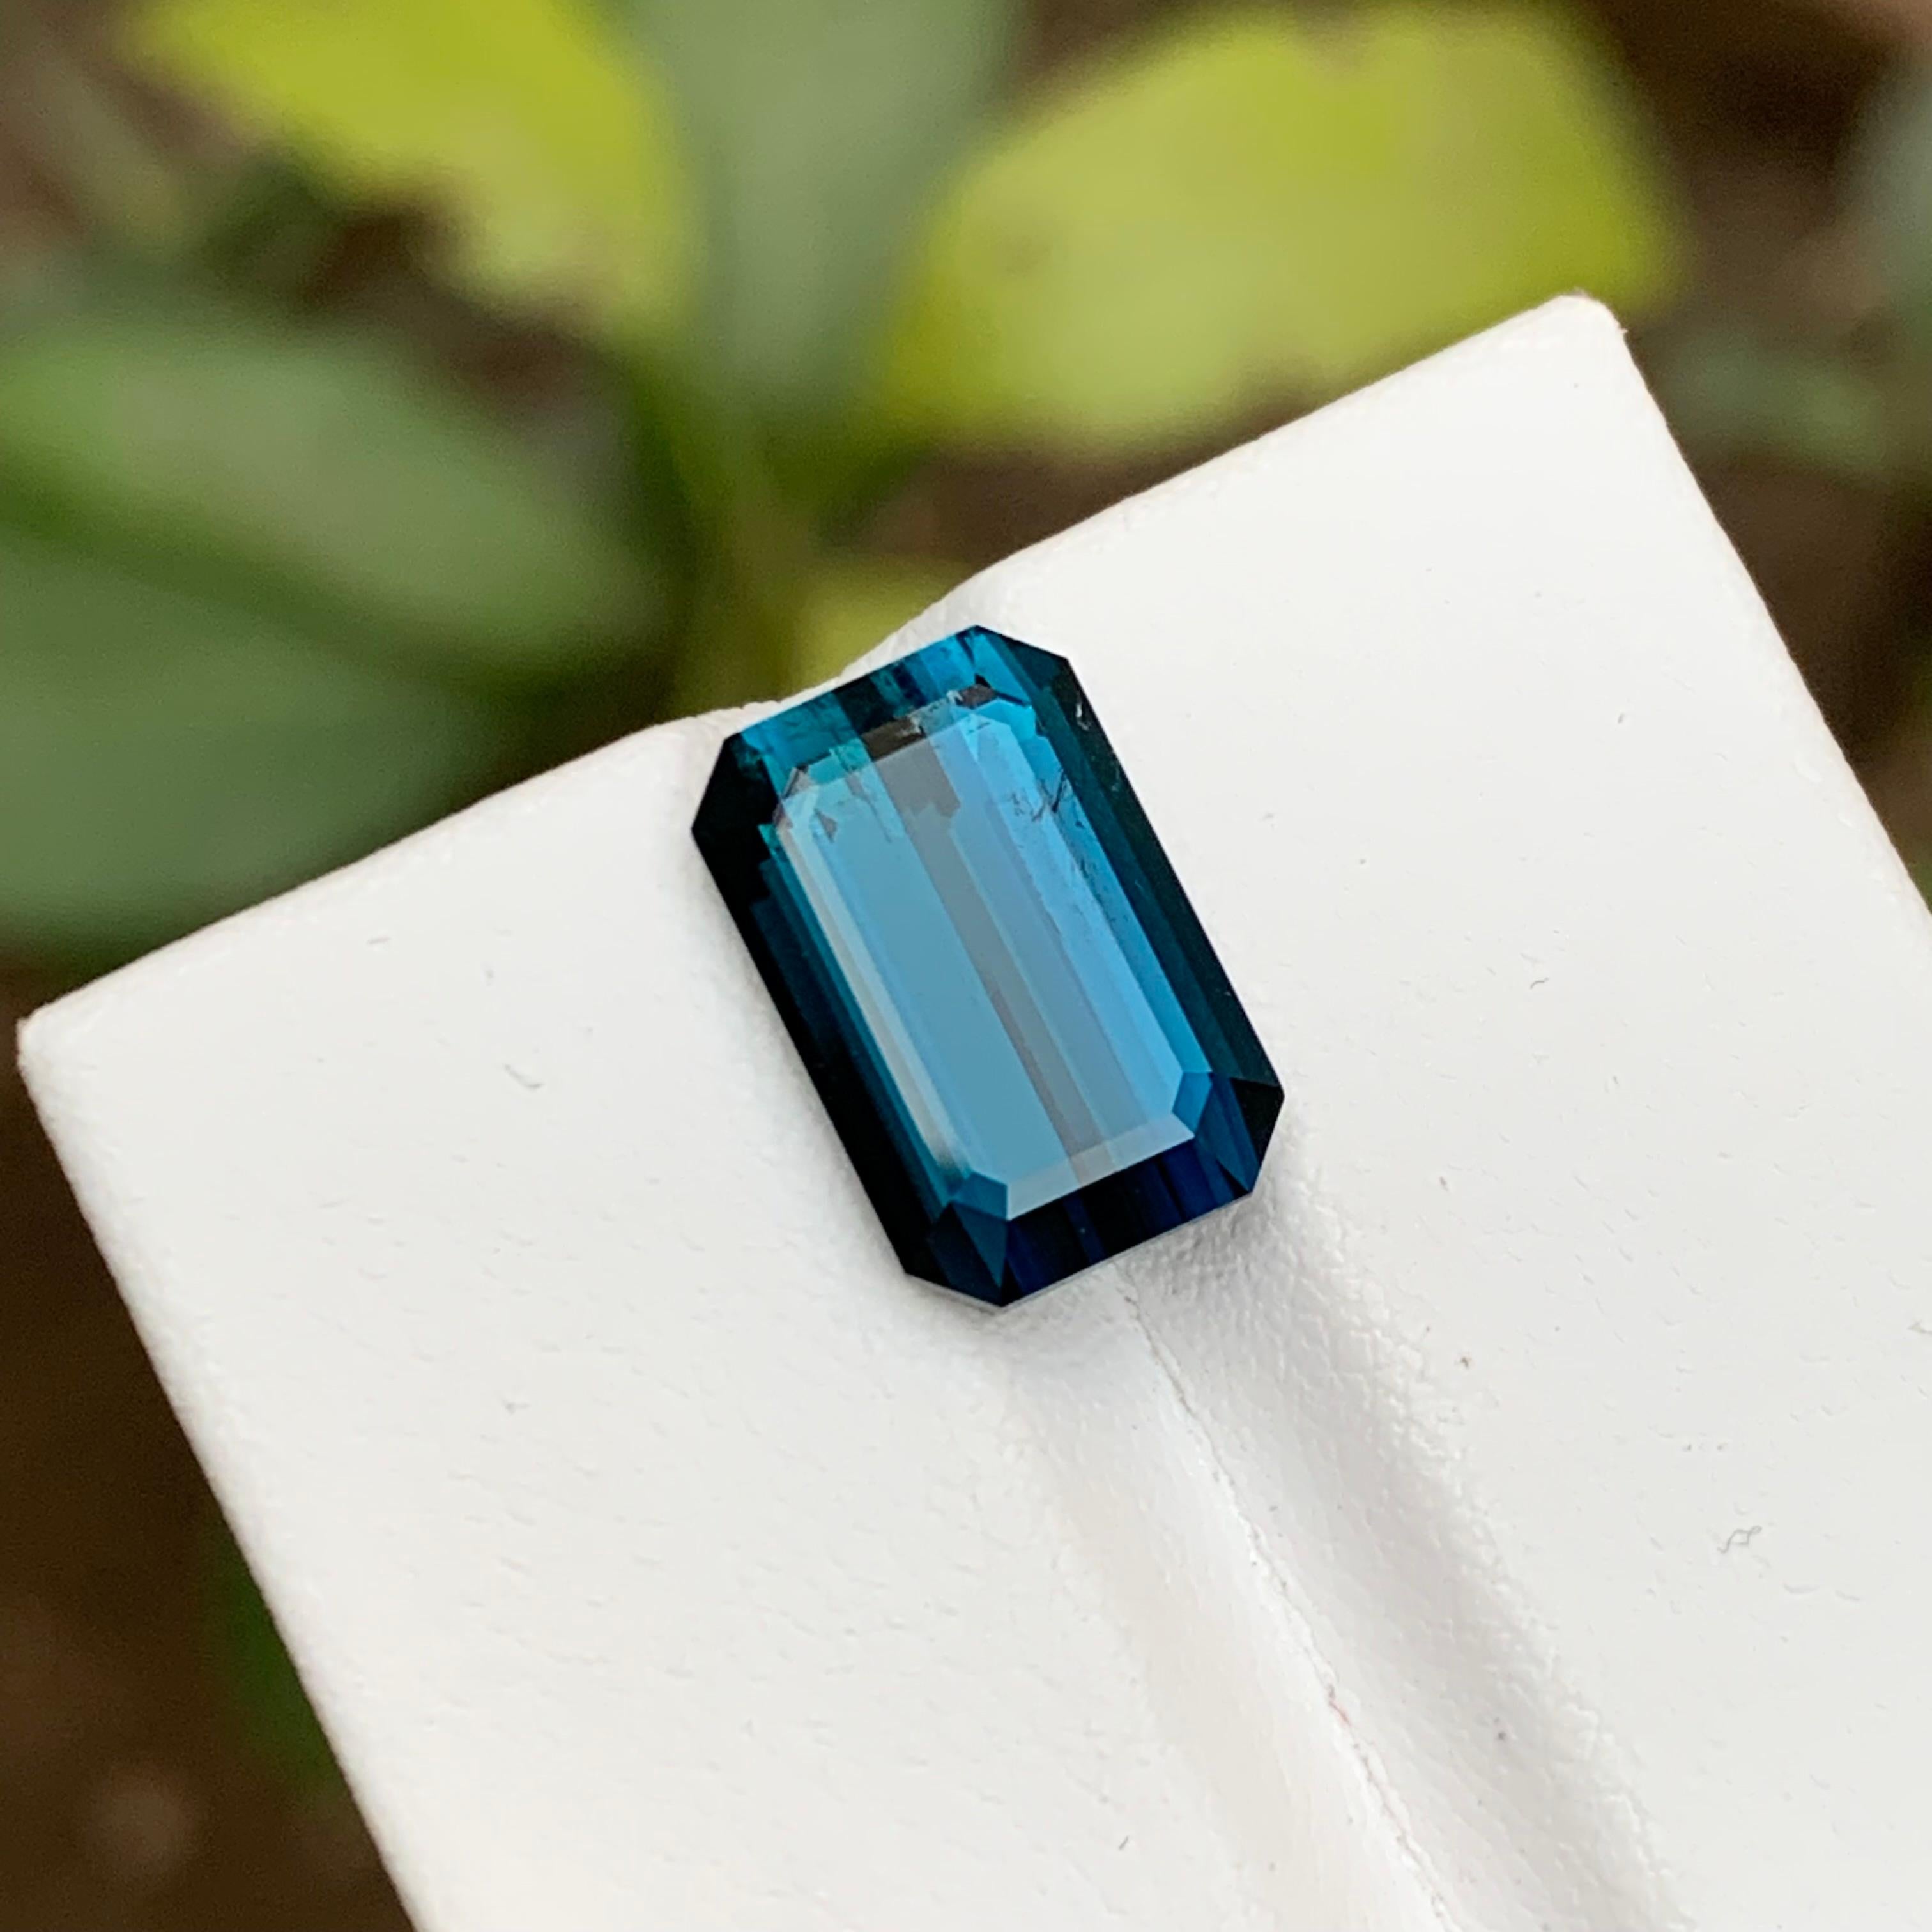 Rare Deep Inky Blue Natural Tourmaline Gemstone, 6.15 Ct Emerald Cut for Ring Af 6